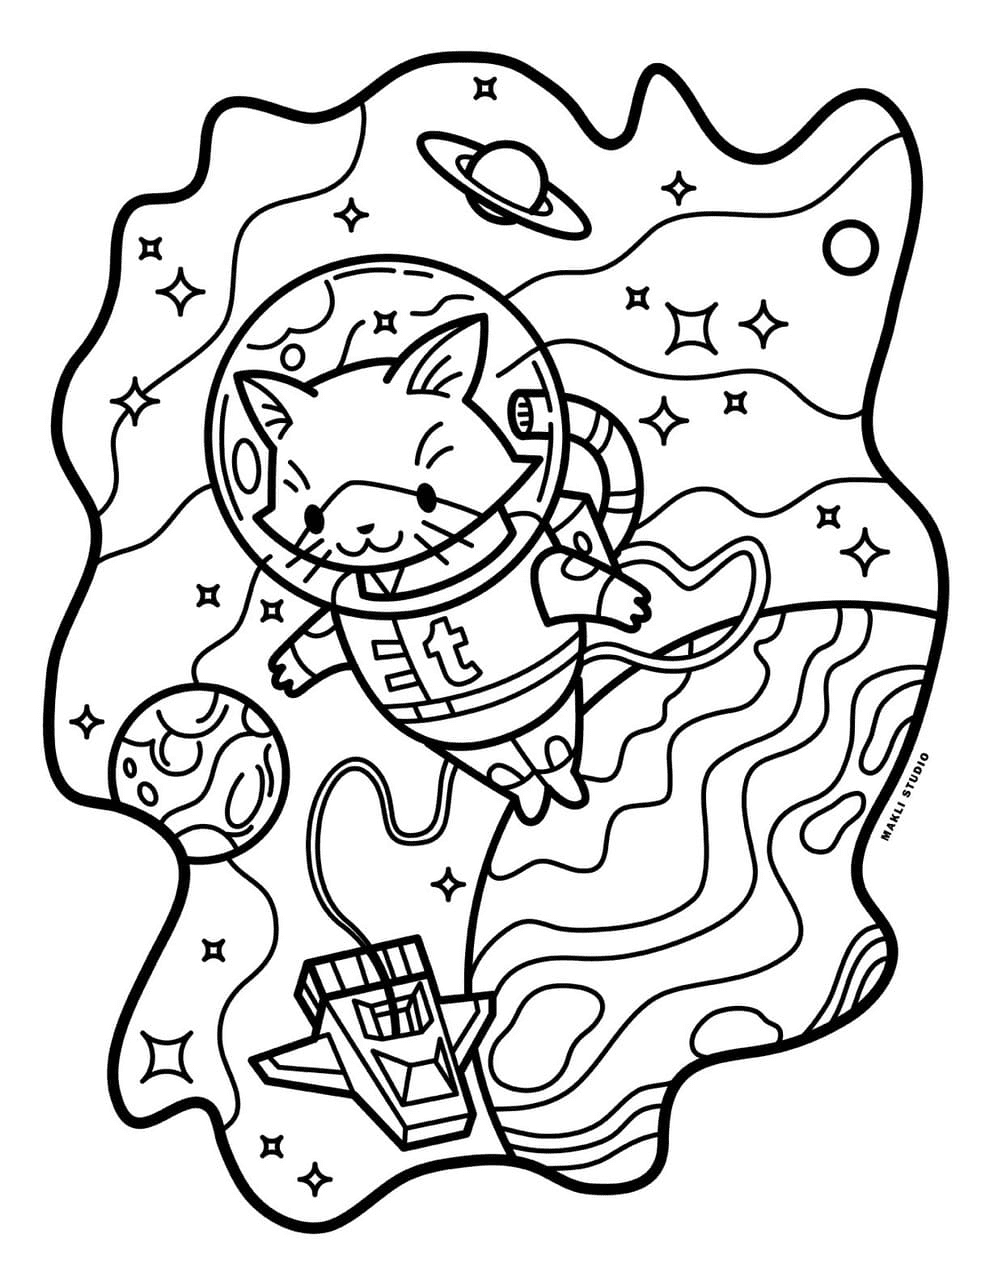 Cat in Space Coloring Page